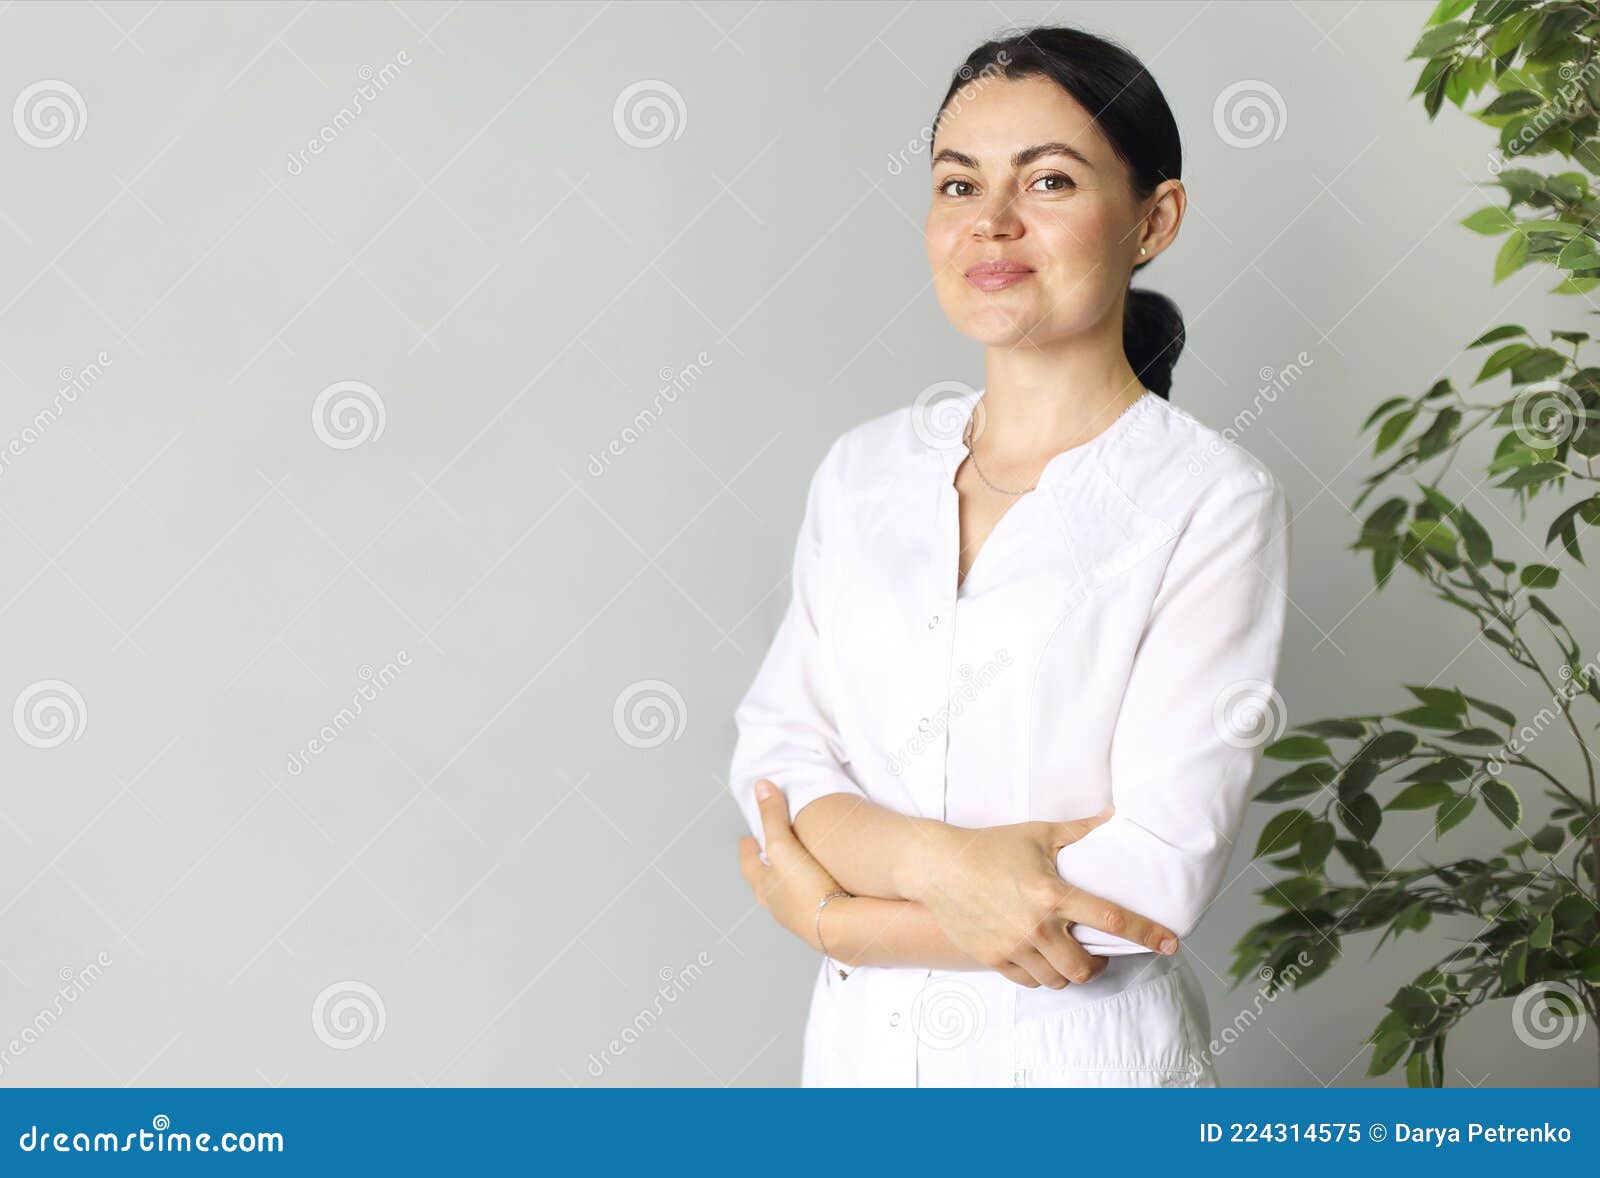 smiling medical woman doctor overlight grey background